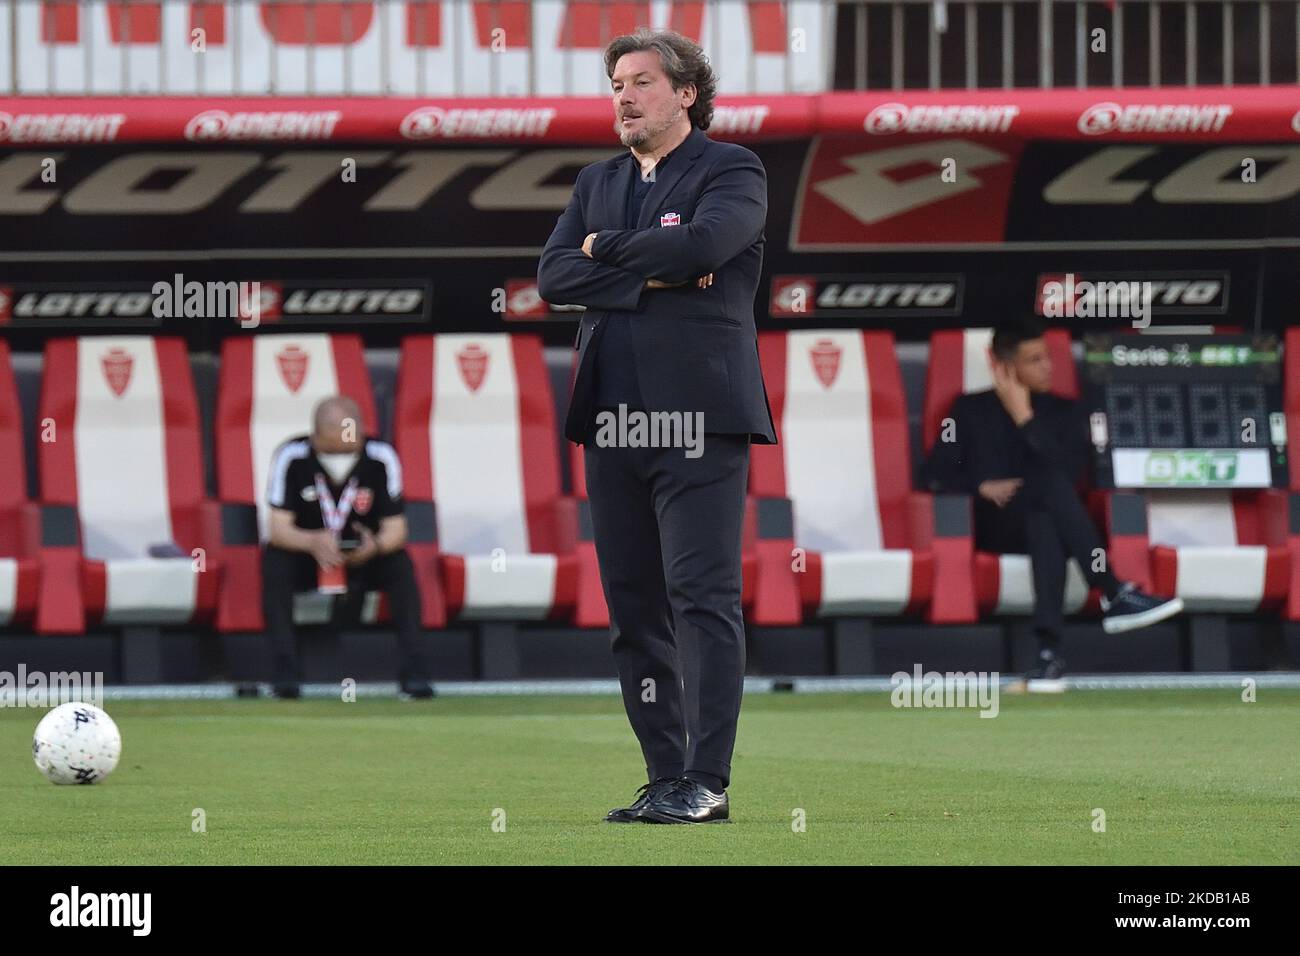 Head coach of Monza Giovanni Stroppa during warmup during the Italian soccer Serie B match Play Off - AC Monza vs AC Pisa on May 26, 2022 at the U-Power Stadium in Monza, Italy (Photo by Gabriele Masotti/LiveMedia/NurPhoto) Stock Photo